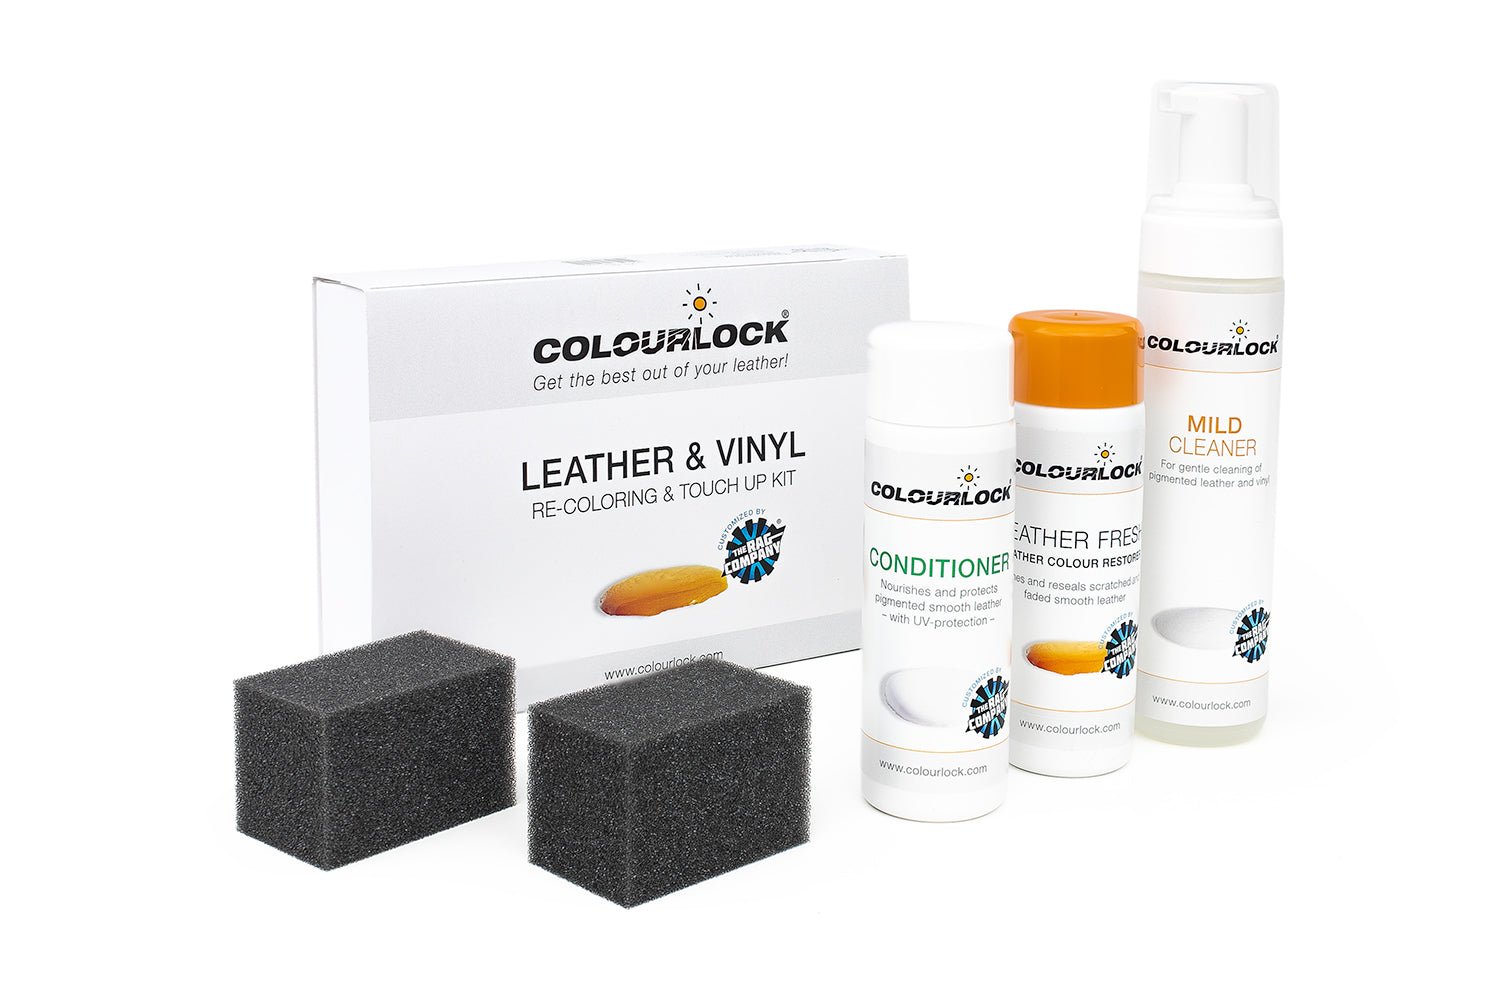 Colourlock - Leather & Vinyl Re-Coloring & Touch Up Kit – The Rag Company  Europe